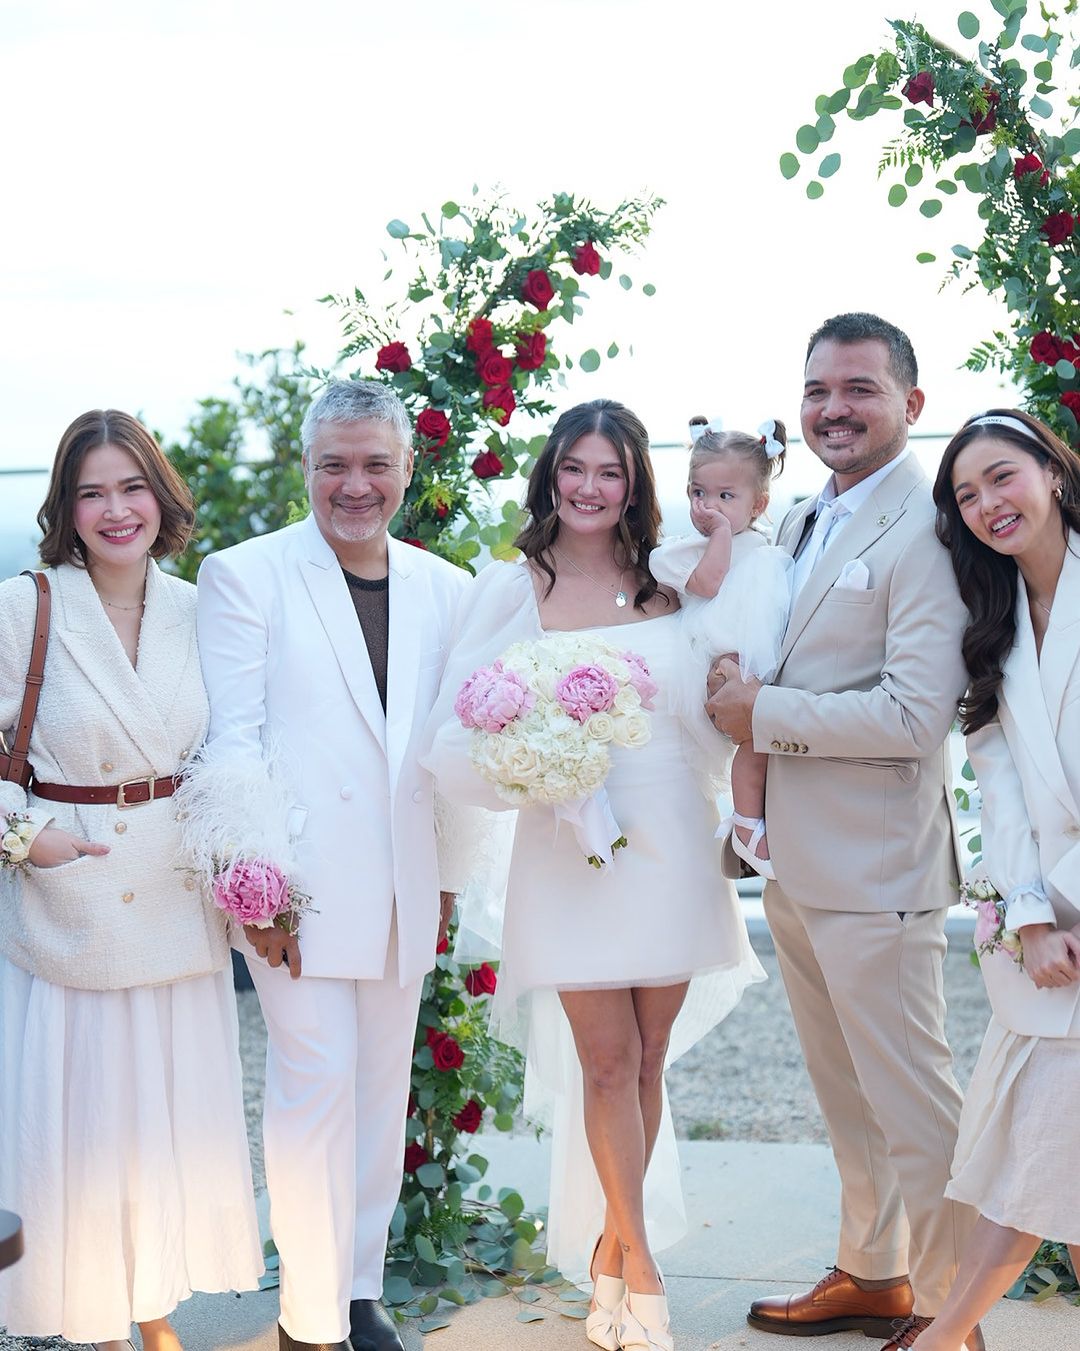 Angelica Panganiban and Gregg Homan start the new year strong with their families as they celebrate their wedding during their holiday vacation.